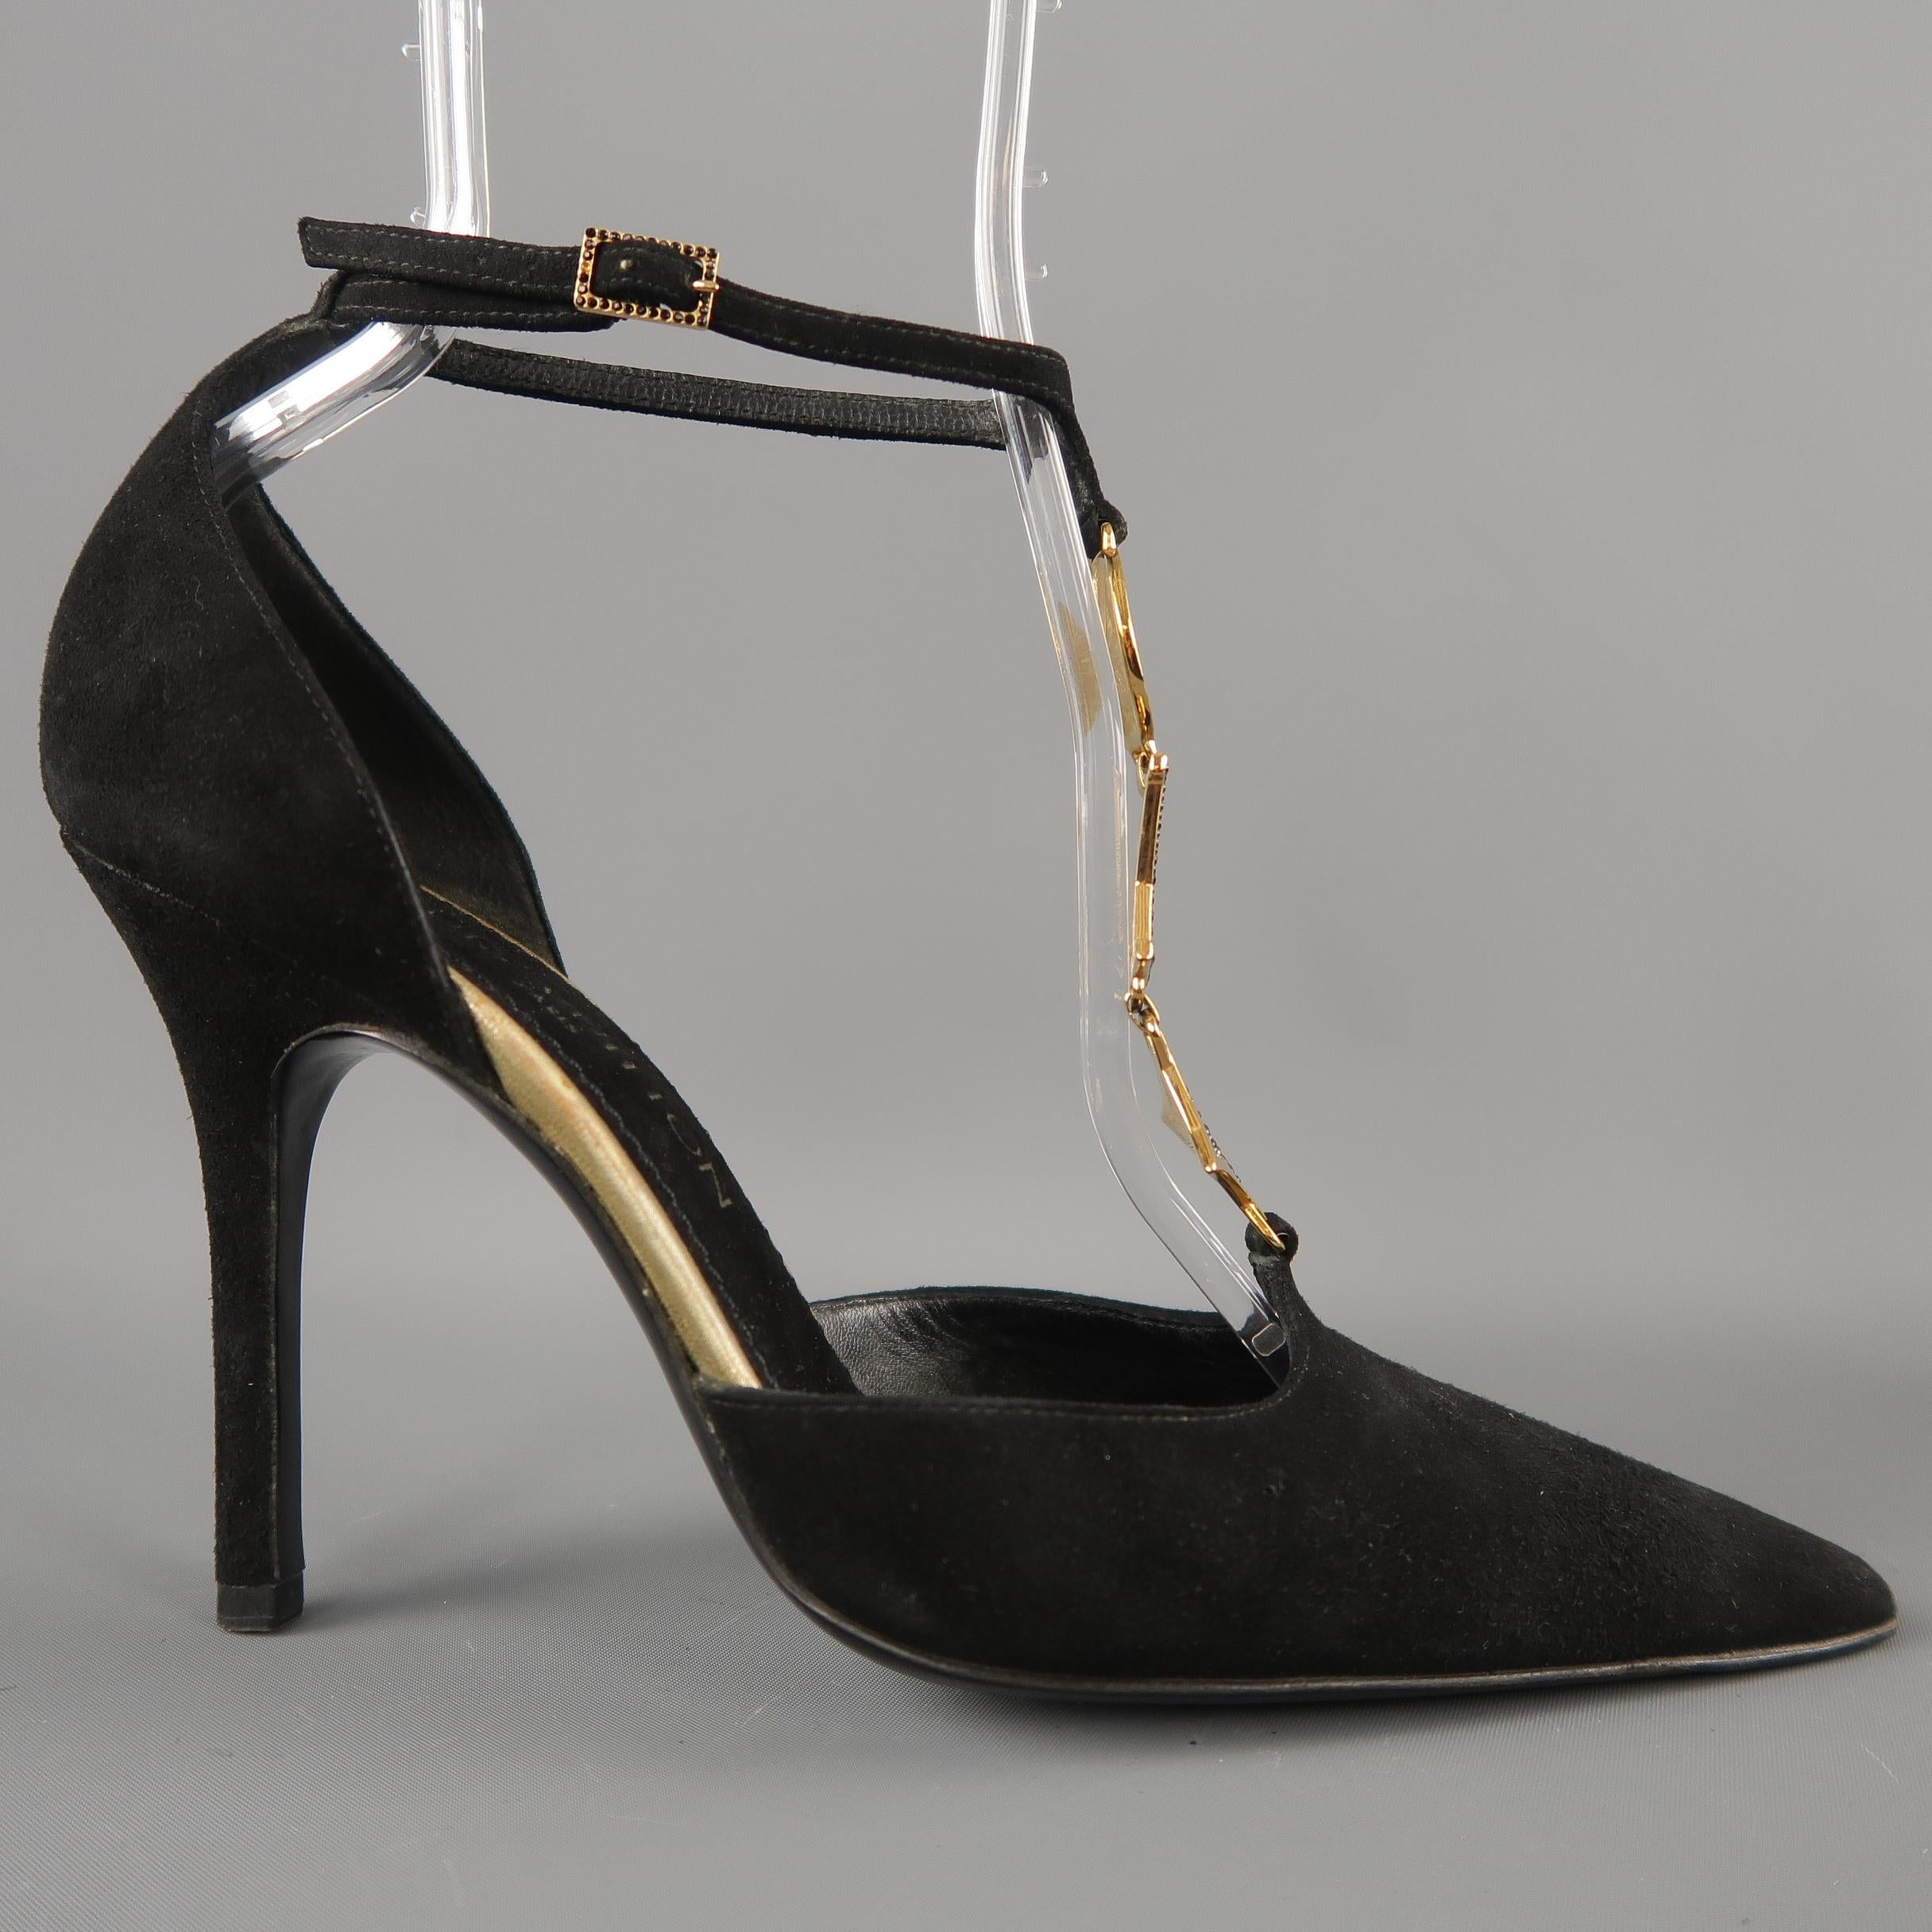 LOUIS VUITTON D'orsay pumps come in black suede with a pointed toe, covered stiletto heel, and ankle strap with gold tone metal rhinestone studded monogram charm T strap. Made in Italy. Retail price $ 1,000.00. 
 
Very Good Pre-Owned